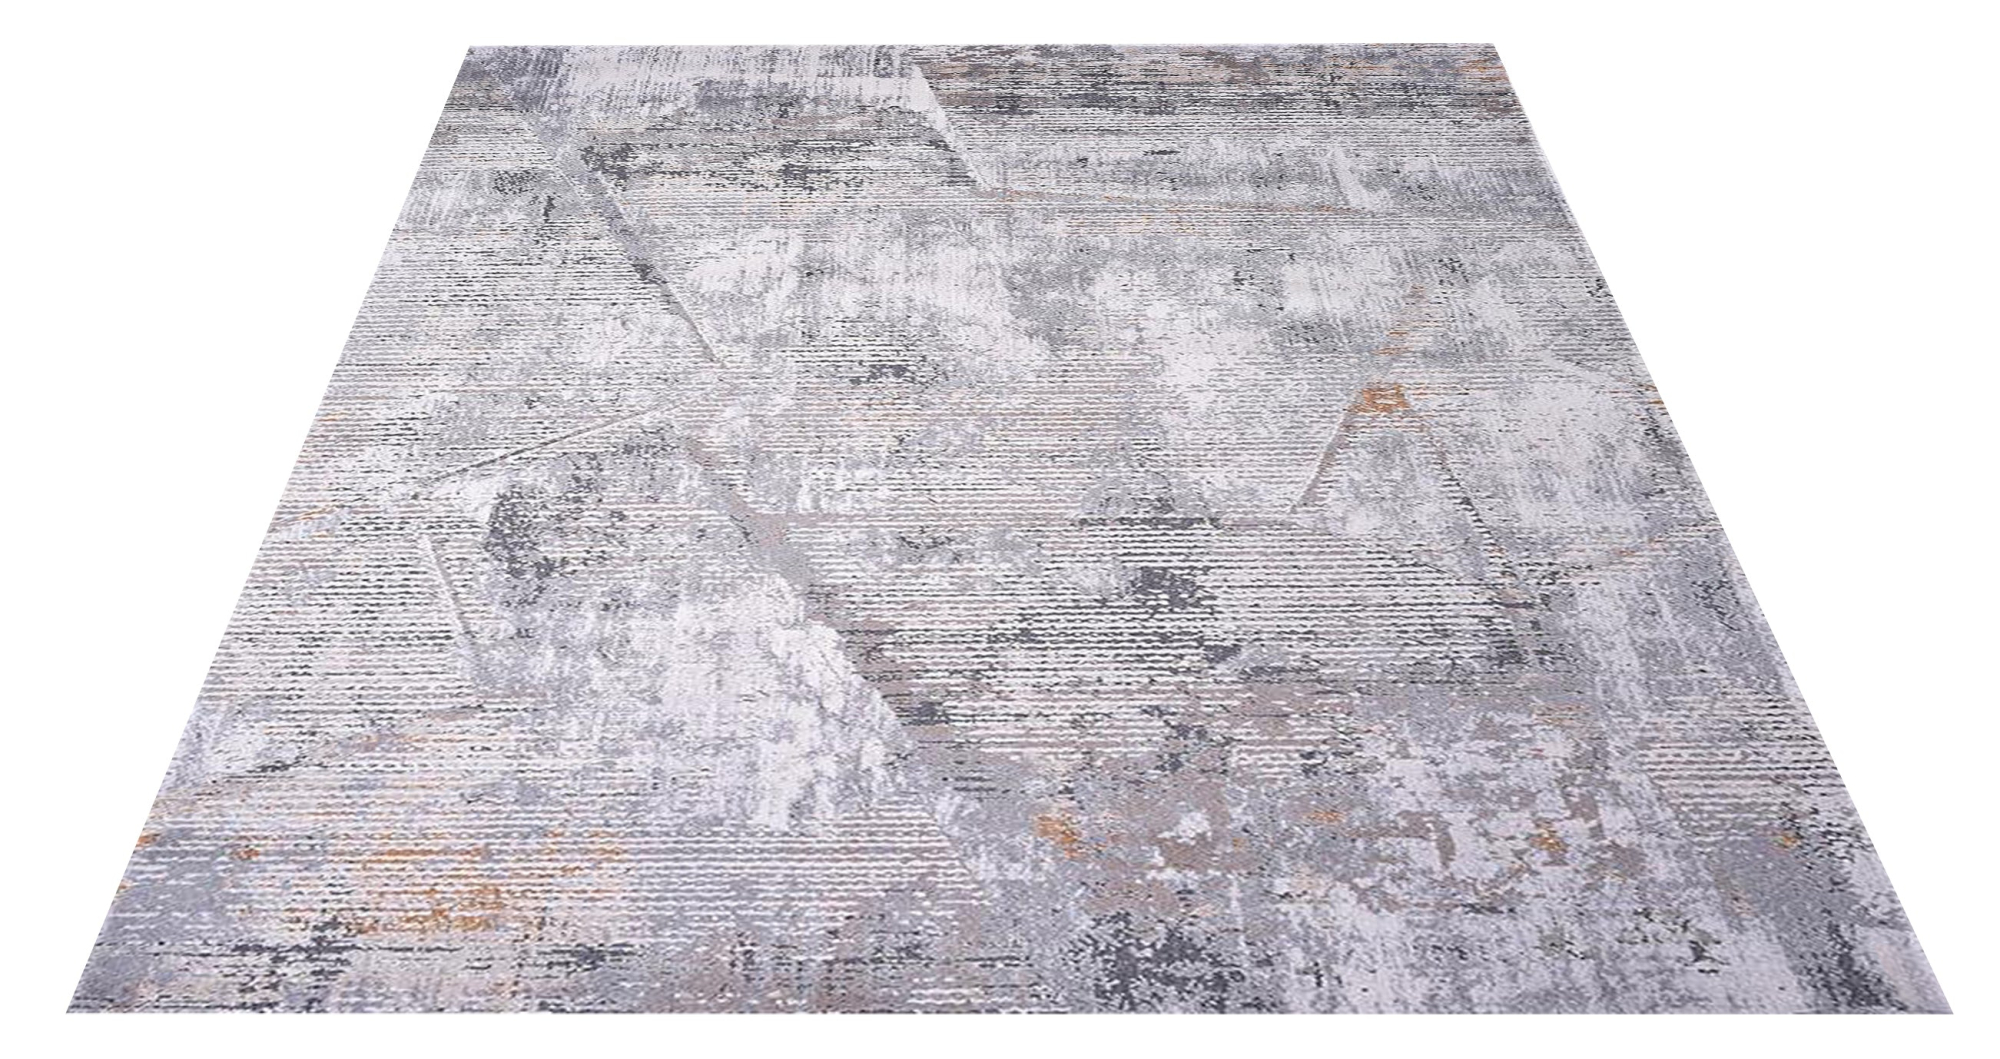 Tobi Mist Woven Rug-Area rug for living room, dining area, and bedroom